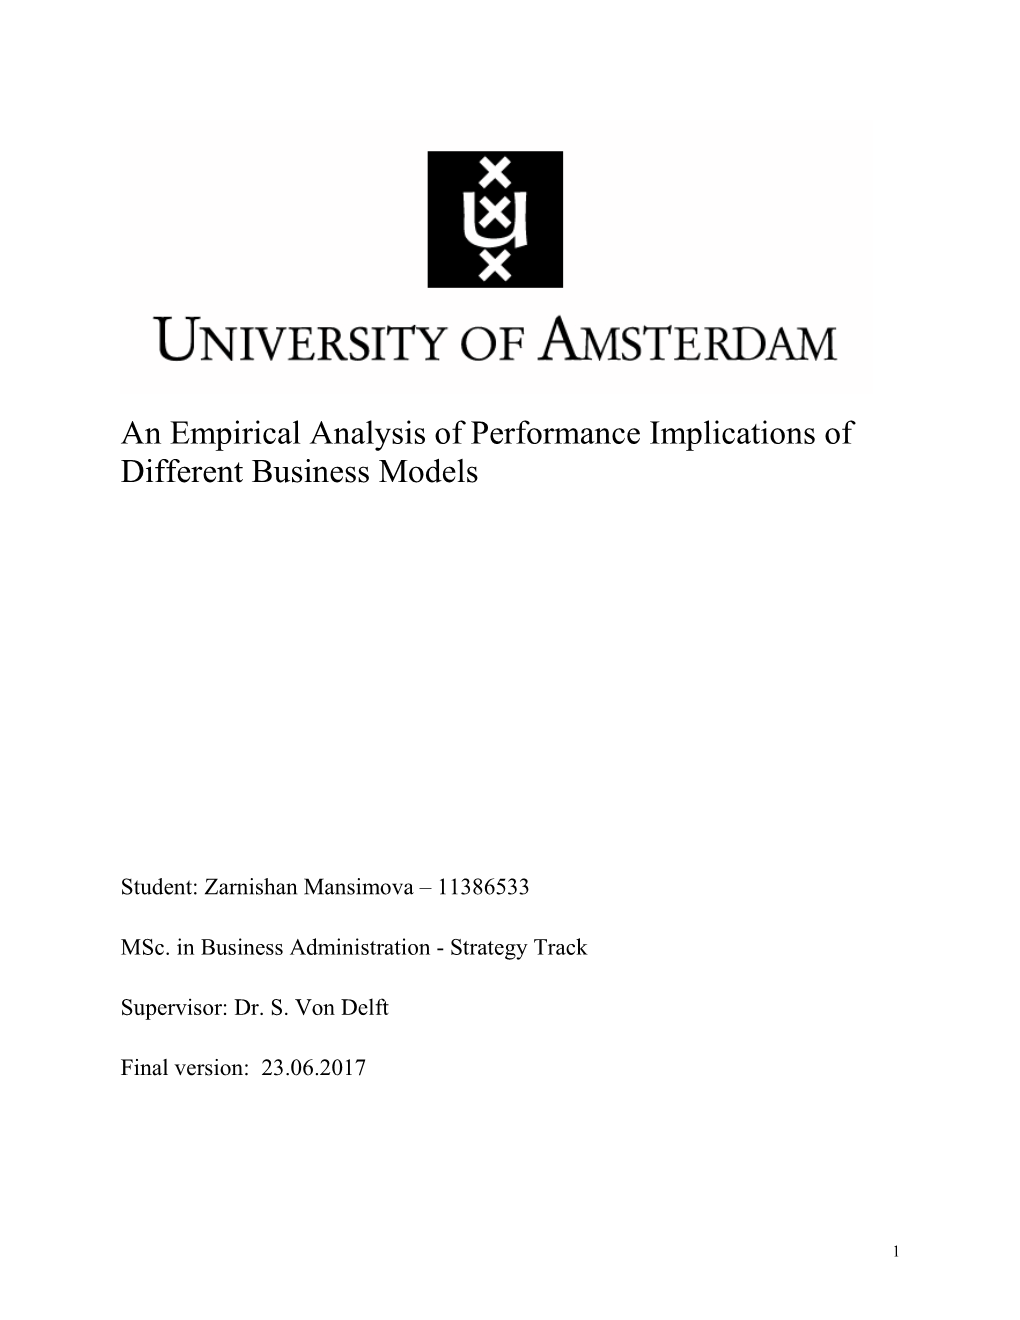 An Empirical Analysis of Performance Implications of Different Business Models